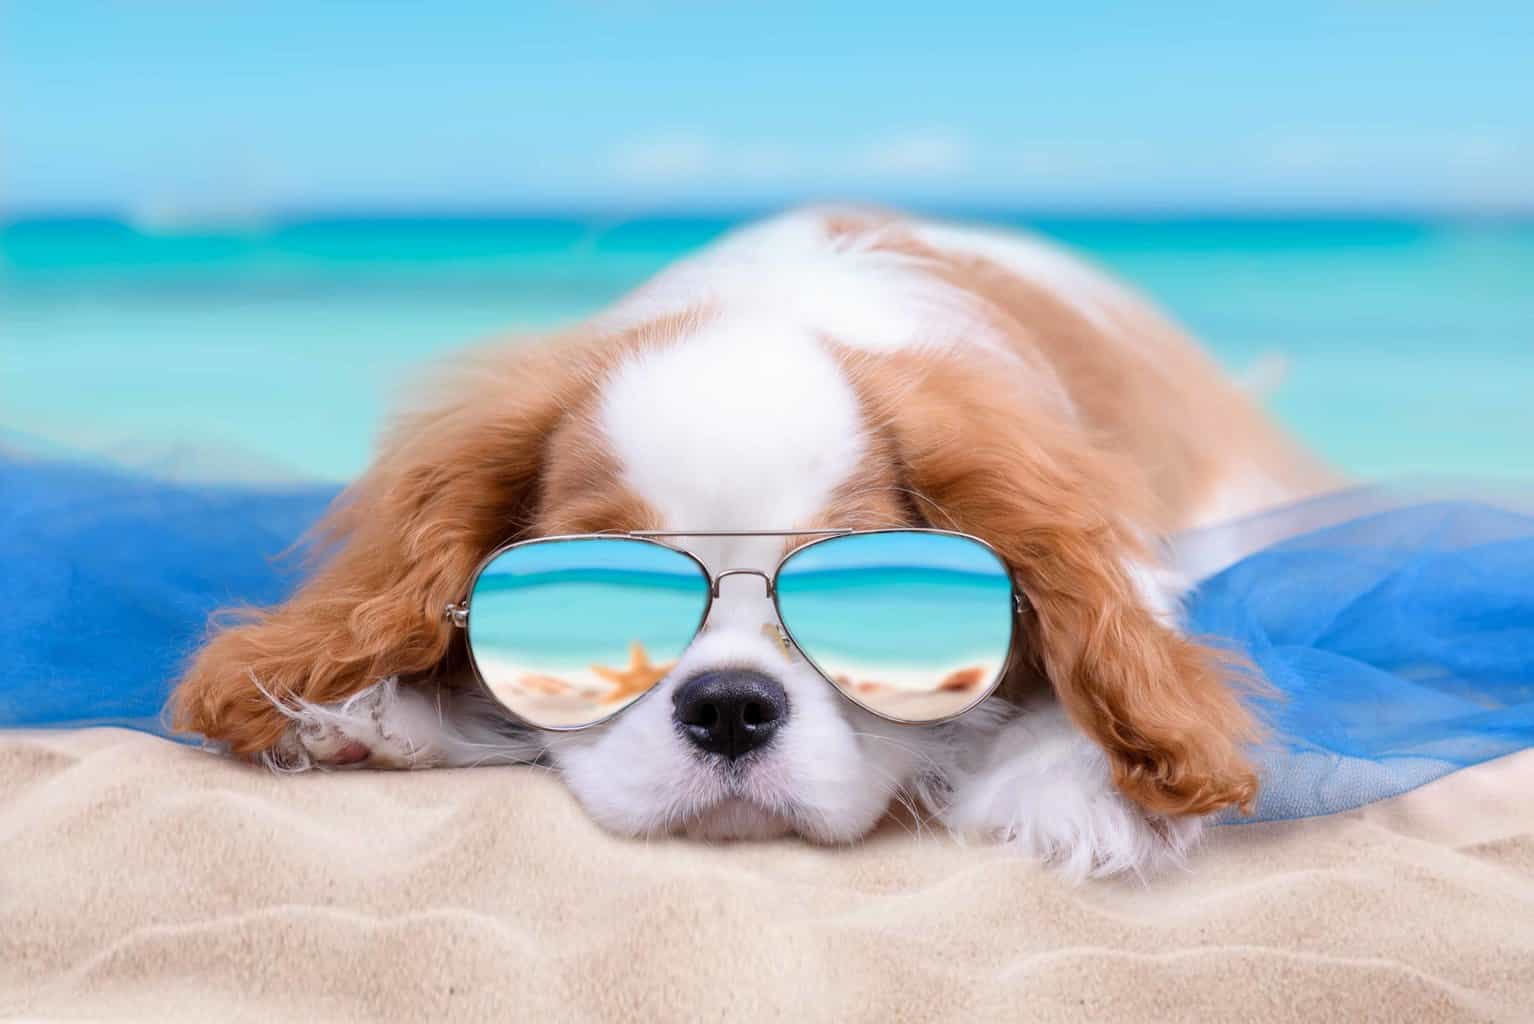 Cavalier King Charles Spaniel puppy wears sunglasses in summer photo illustration. Use our summer grooming tips to reduce the risk of dehydration, foot pad burn, heat stroke, and sunburn in high temperatures.